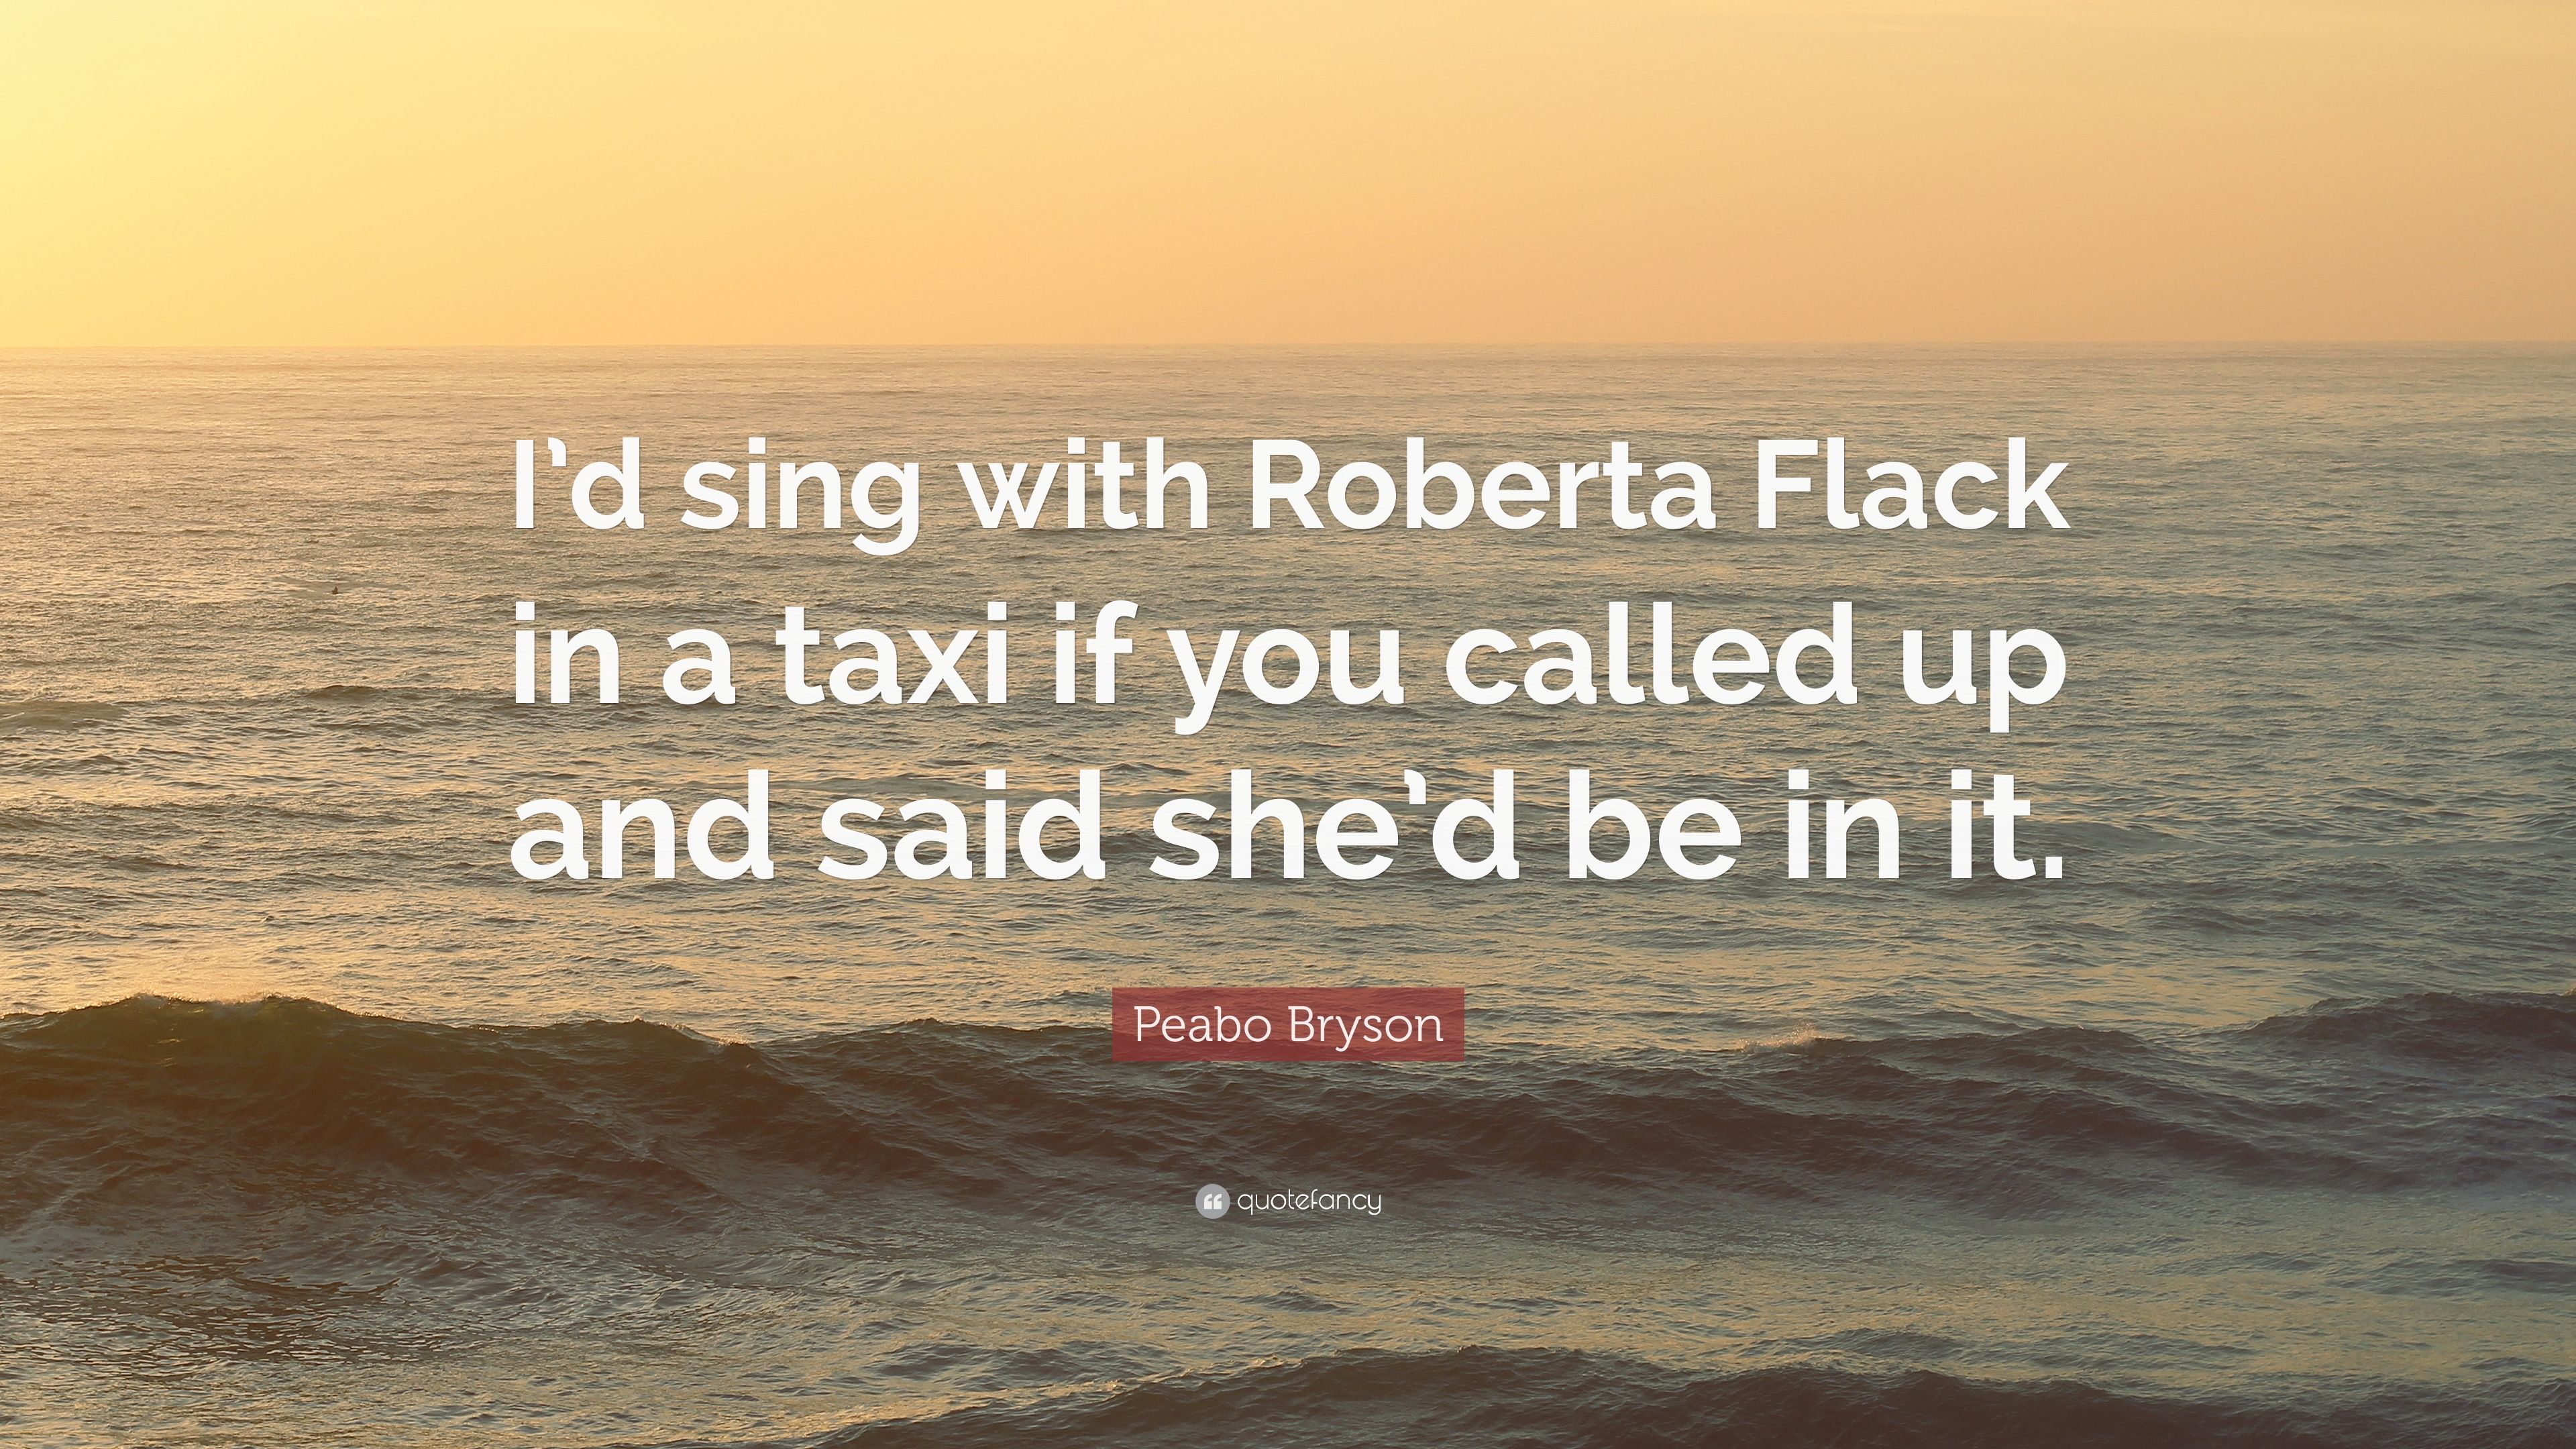 Peabo Bryson Quote: “I'd sing with Roberta Flack in a taxi if you